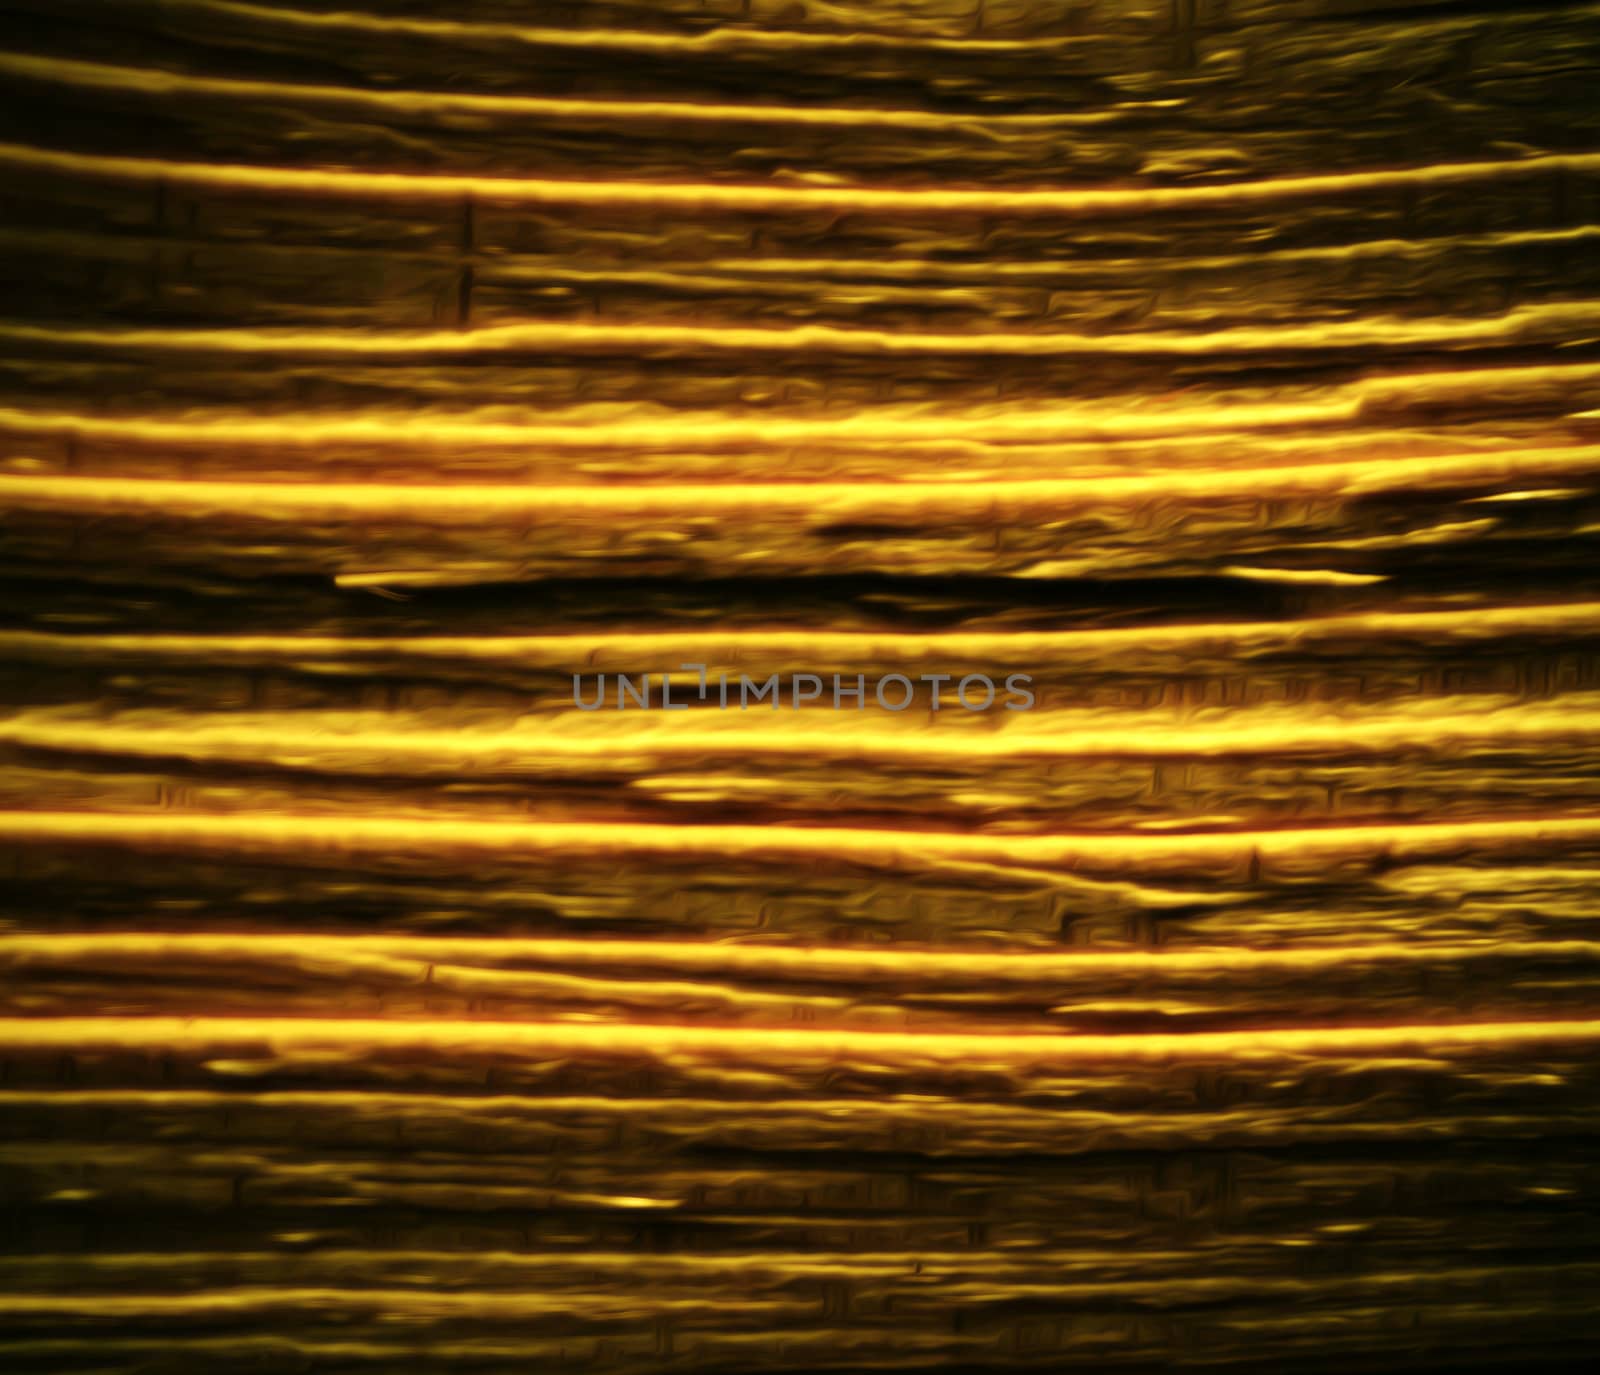 background or texture blurred golden colored striped pattern